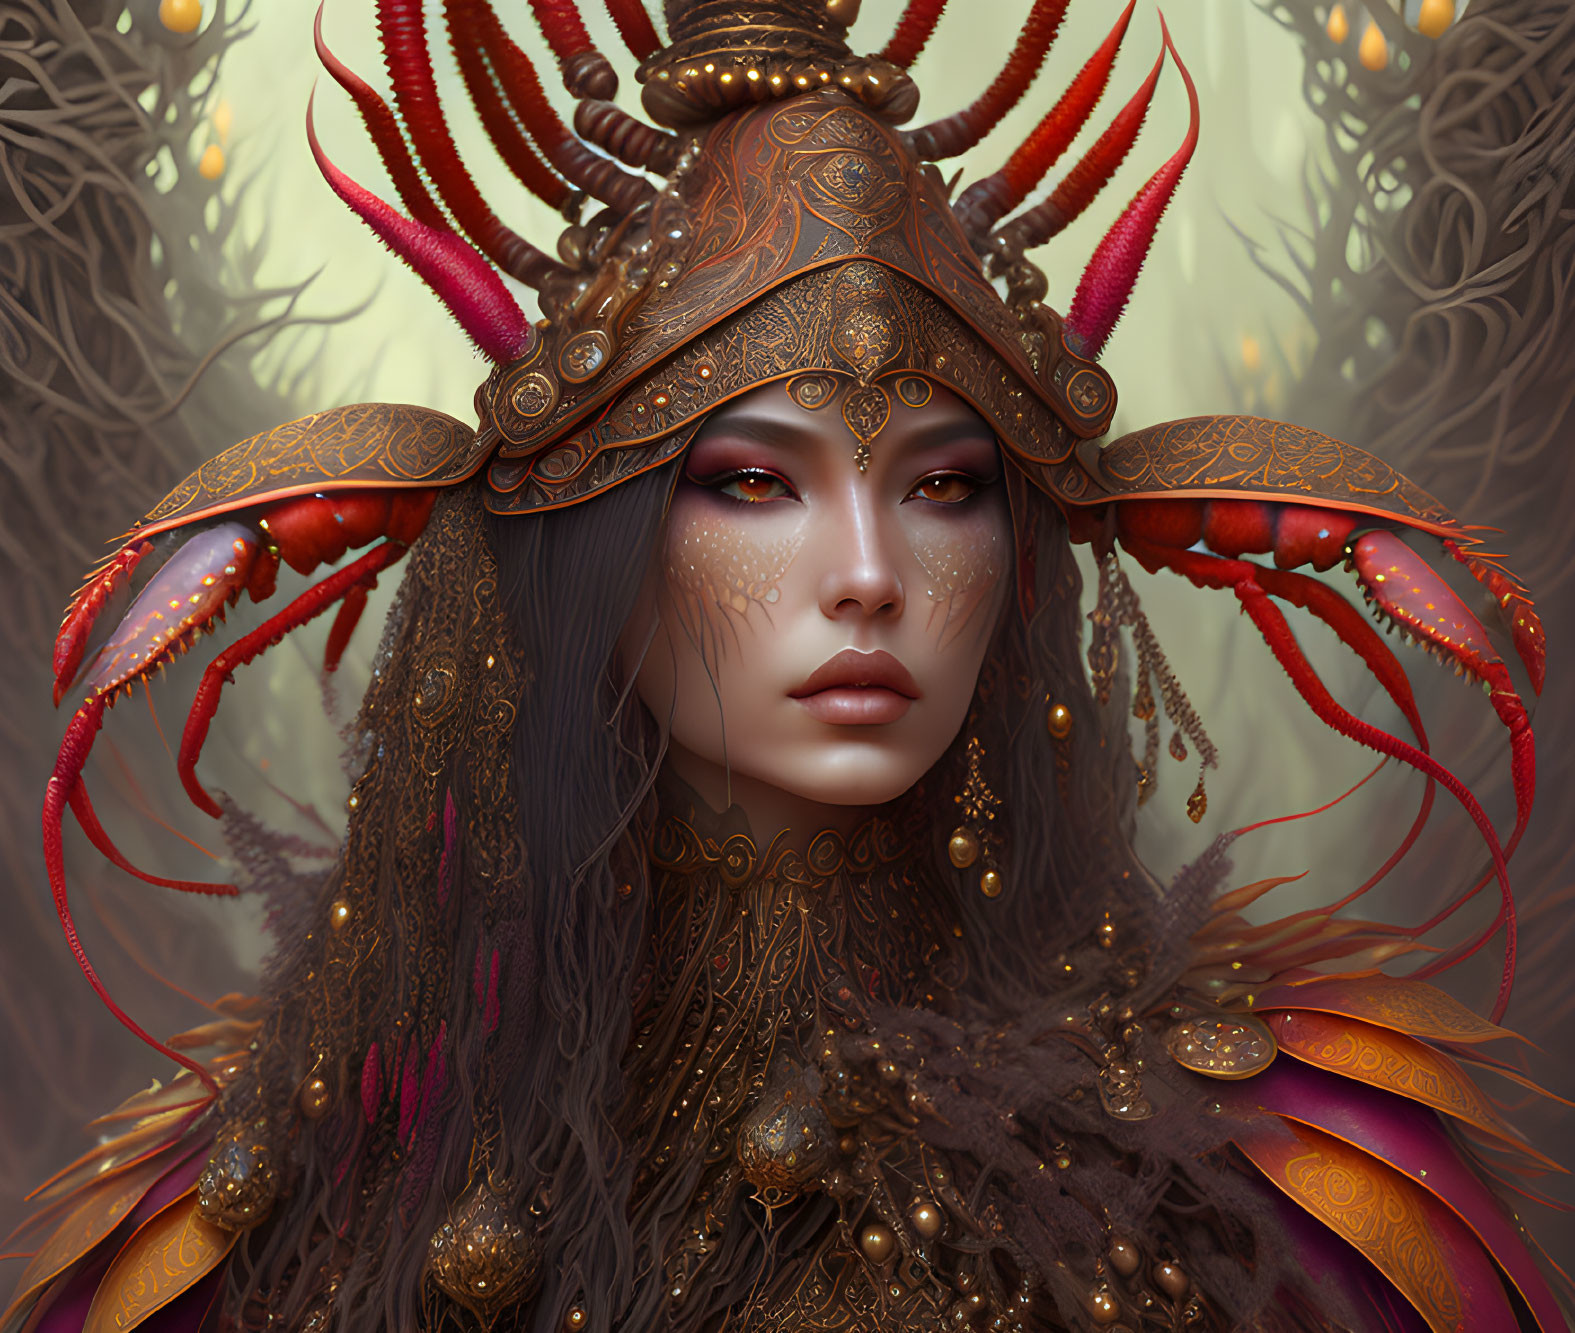 Fantasy Female Character with Gold and Red Headdress and Armor in Twisted Branches